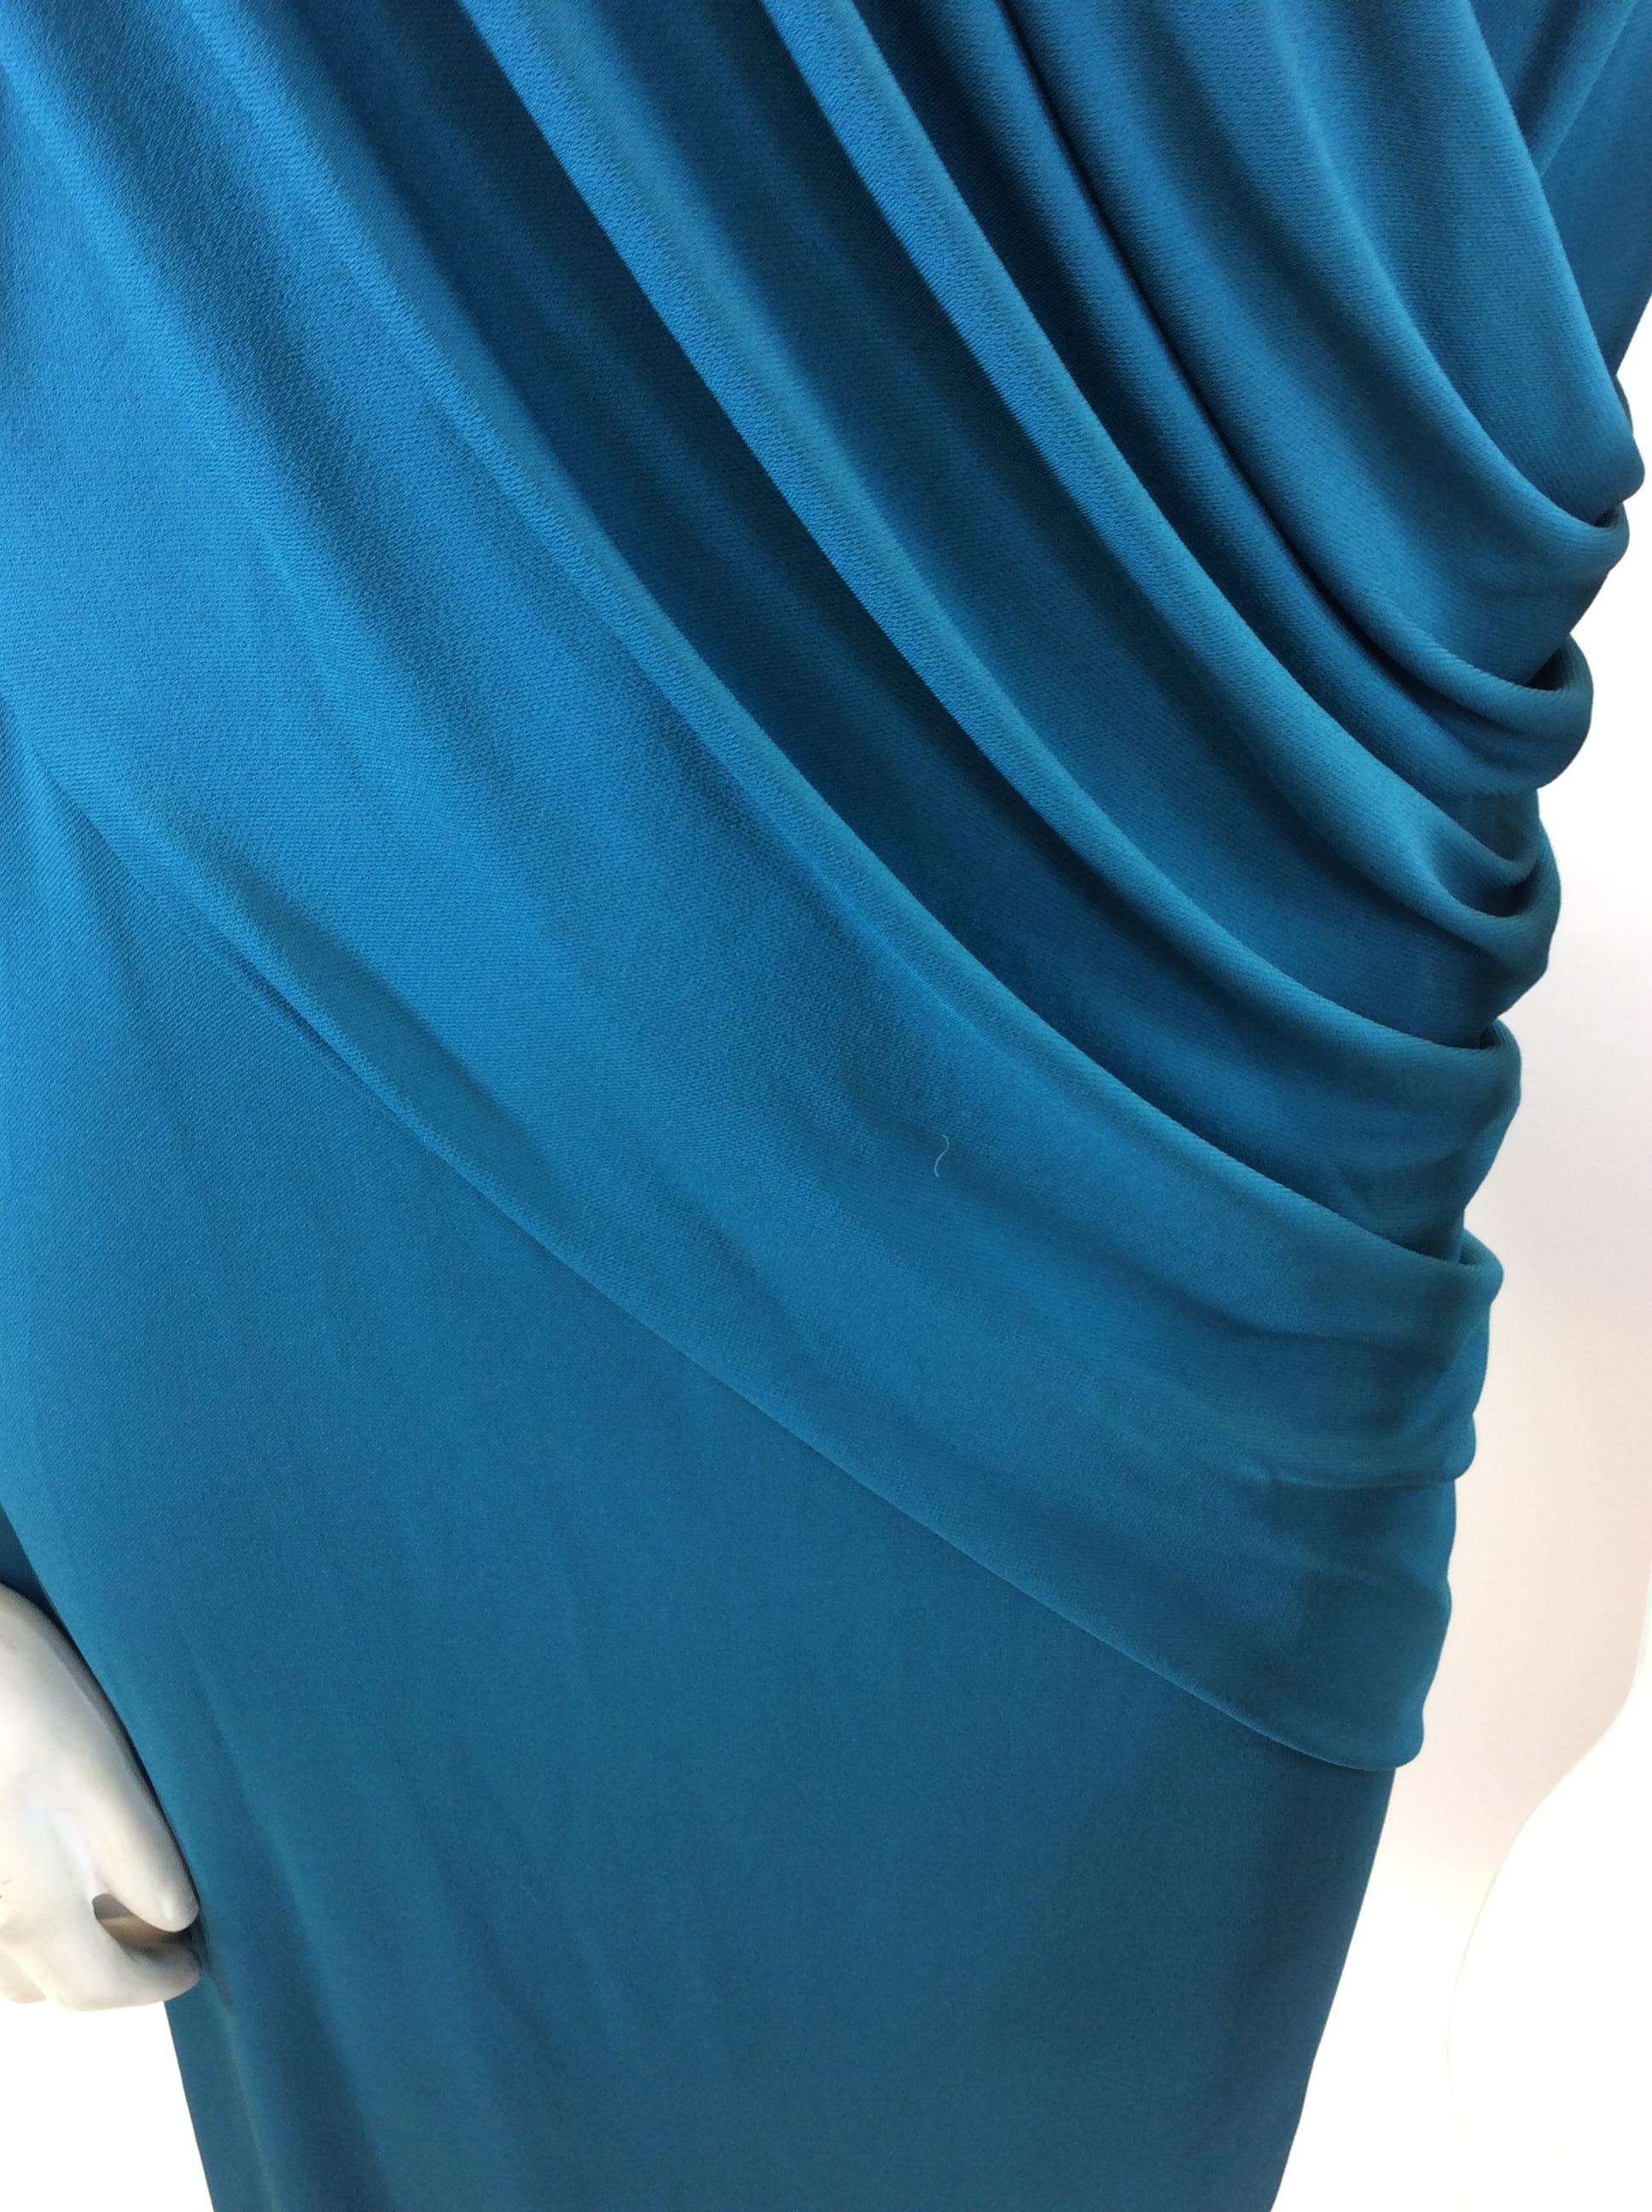 Narciso Rodriguez Teal Dress For Sale 1